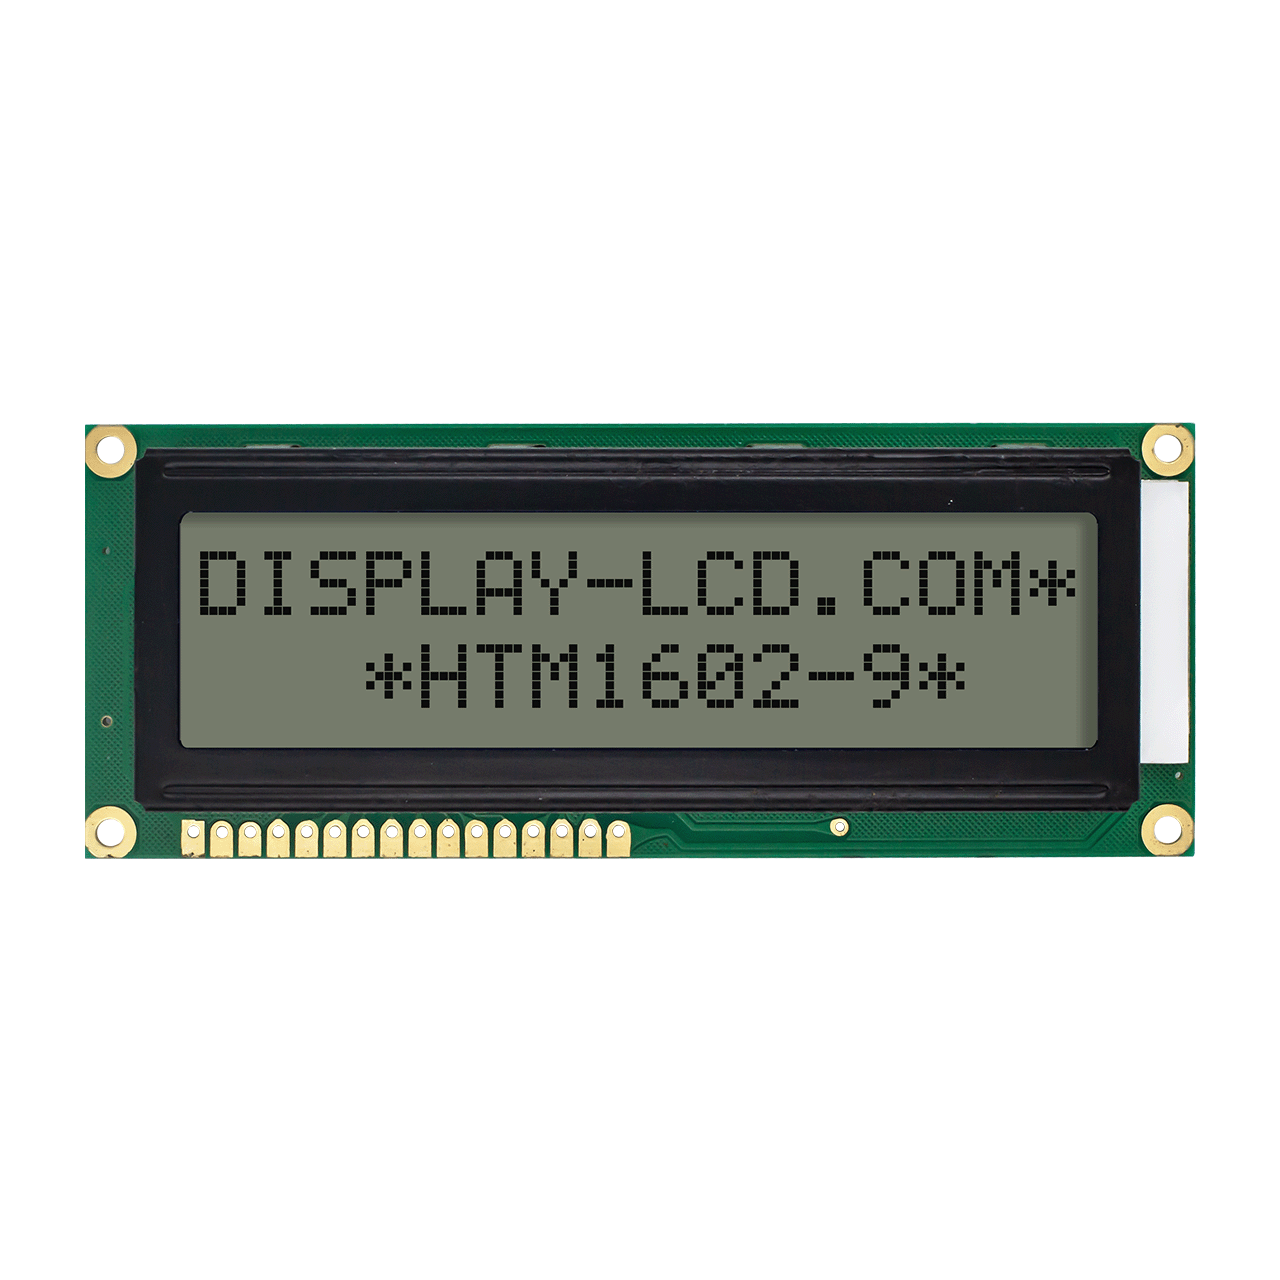 2X16 Character LCD Module Display | FSTN+ with White Backlight 5.0V-Arduino